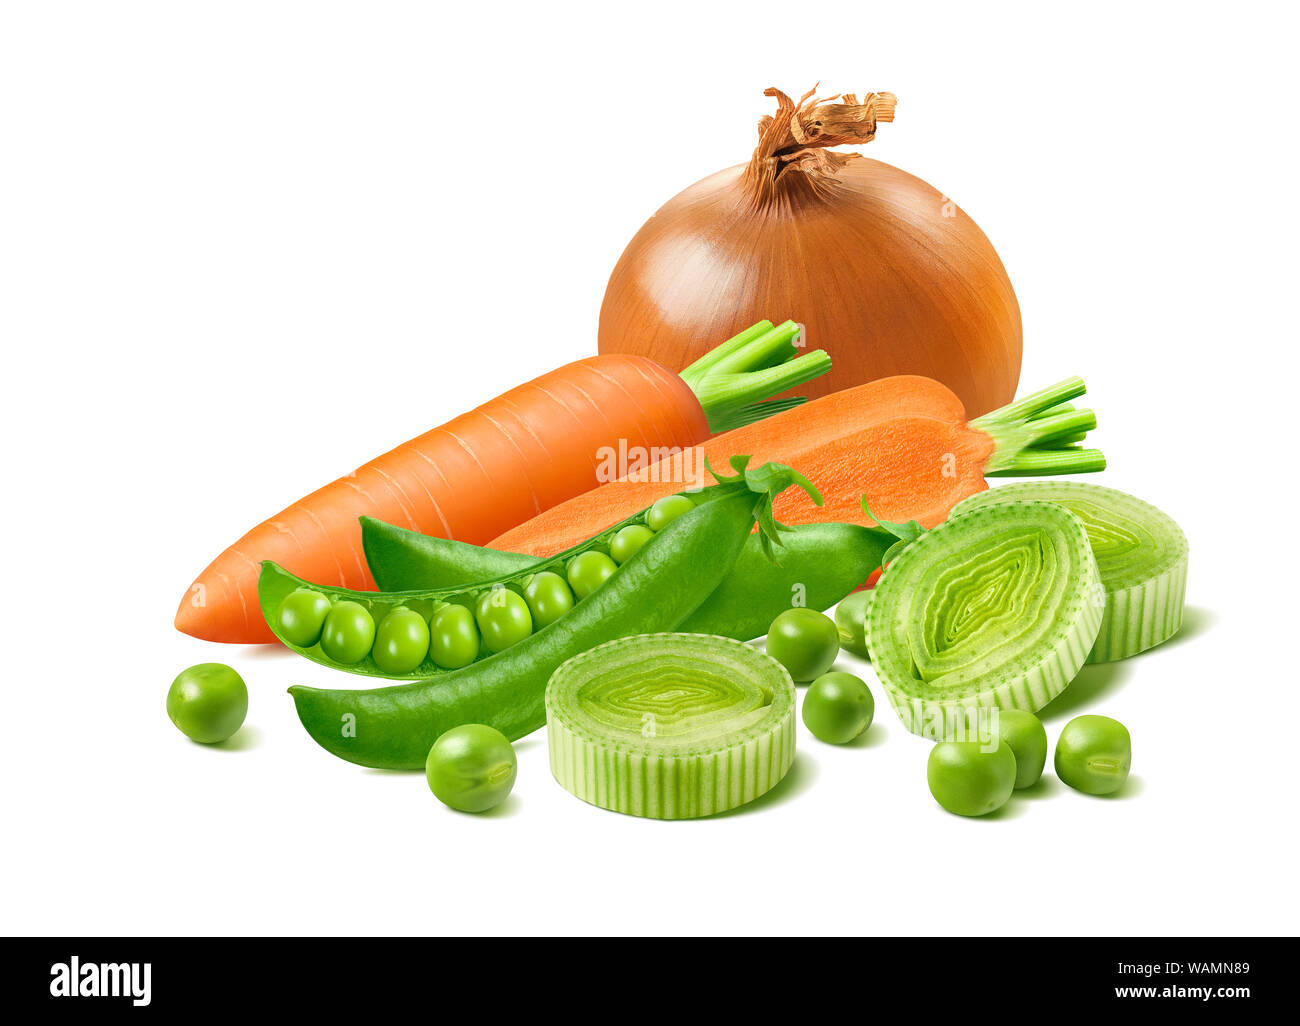 Onion, carrot, leek and green peas in pods isolated on white background. Package design element with clipping path Stock Photo